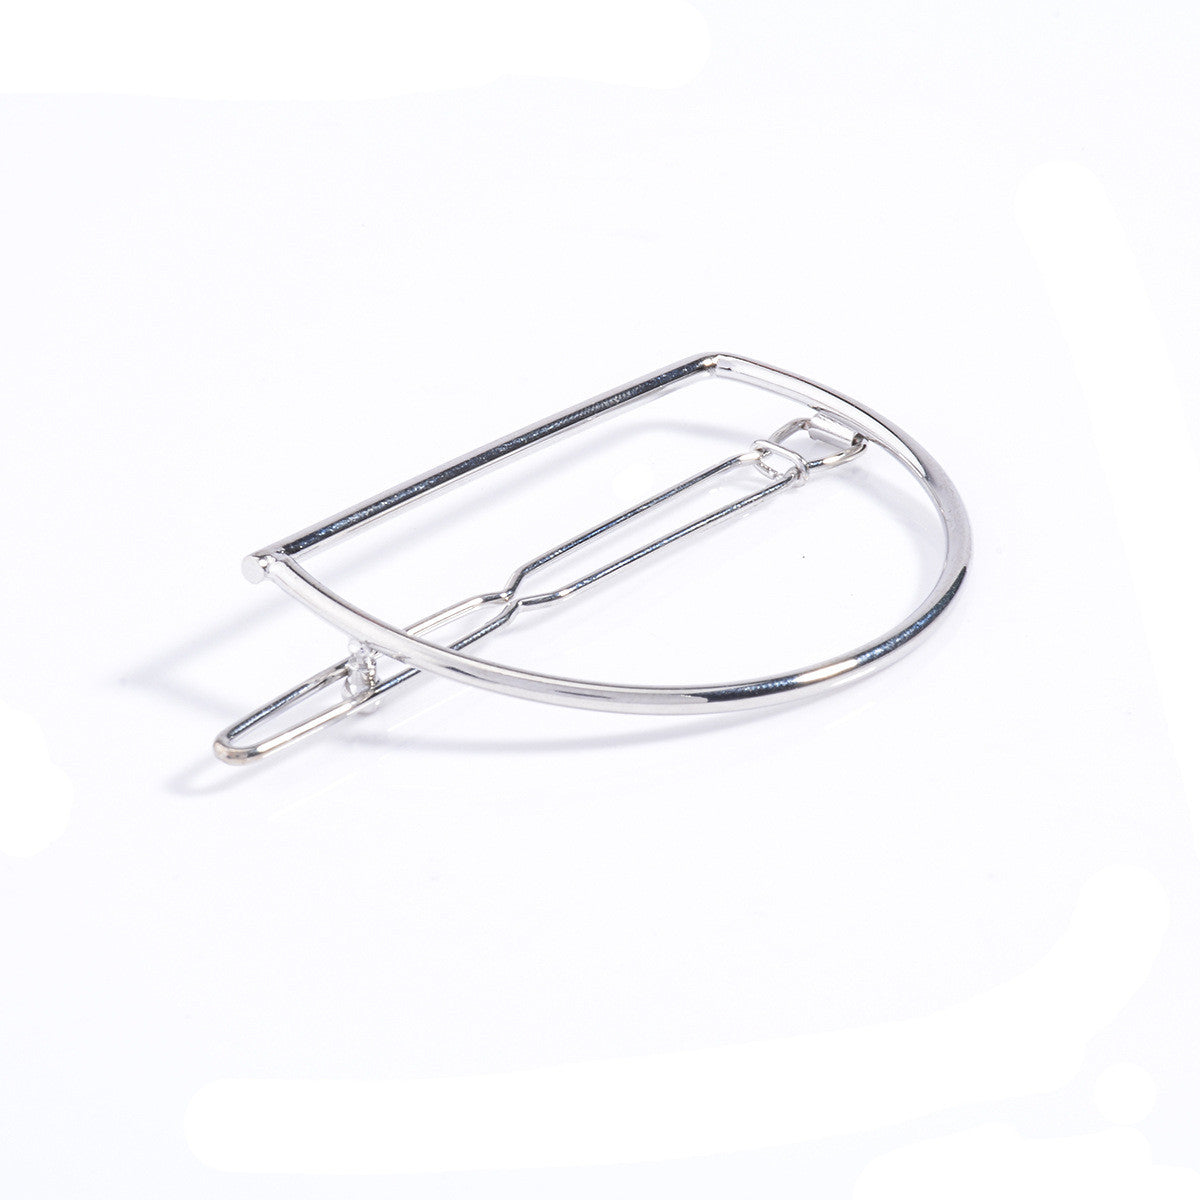 Simple D Shape Women's Hairpin - Oh Yours Fashion - 4